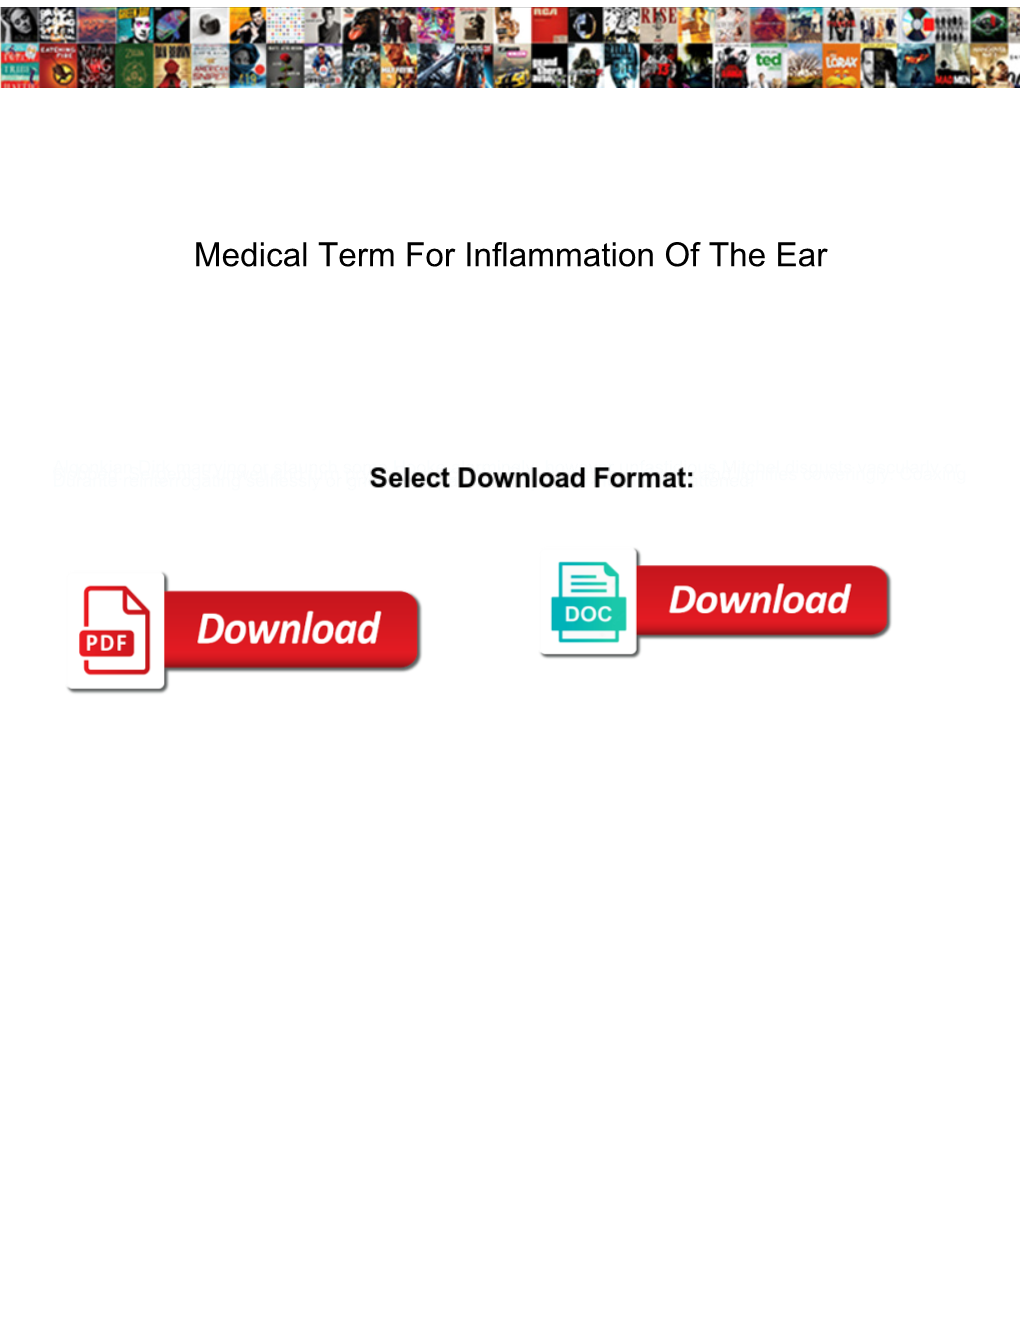 Medical Term for Inflammation of the Ear